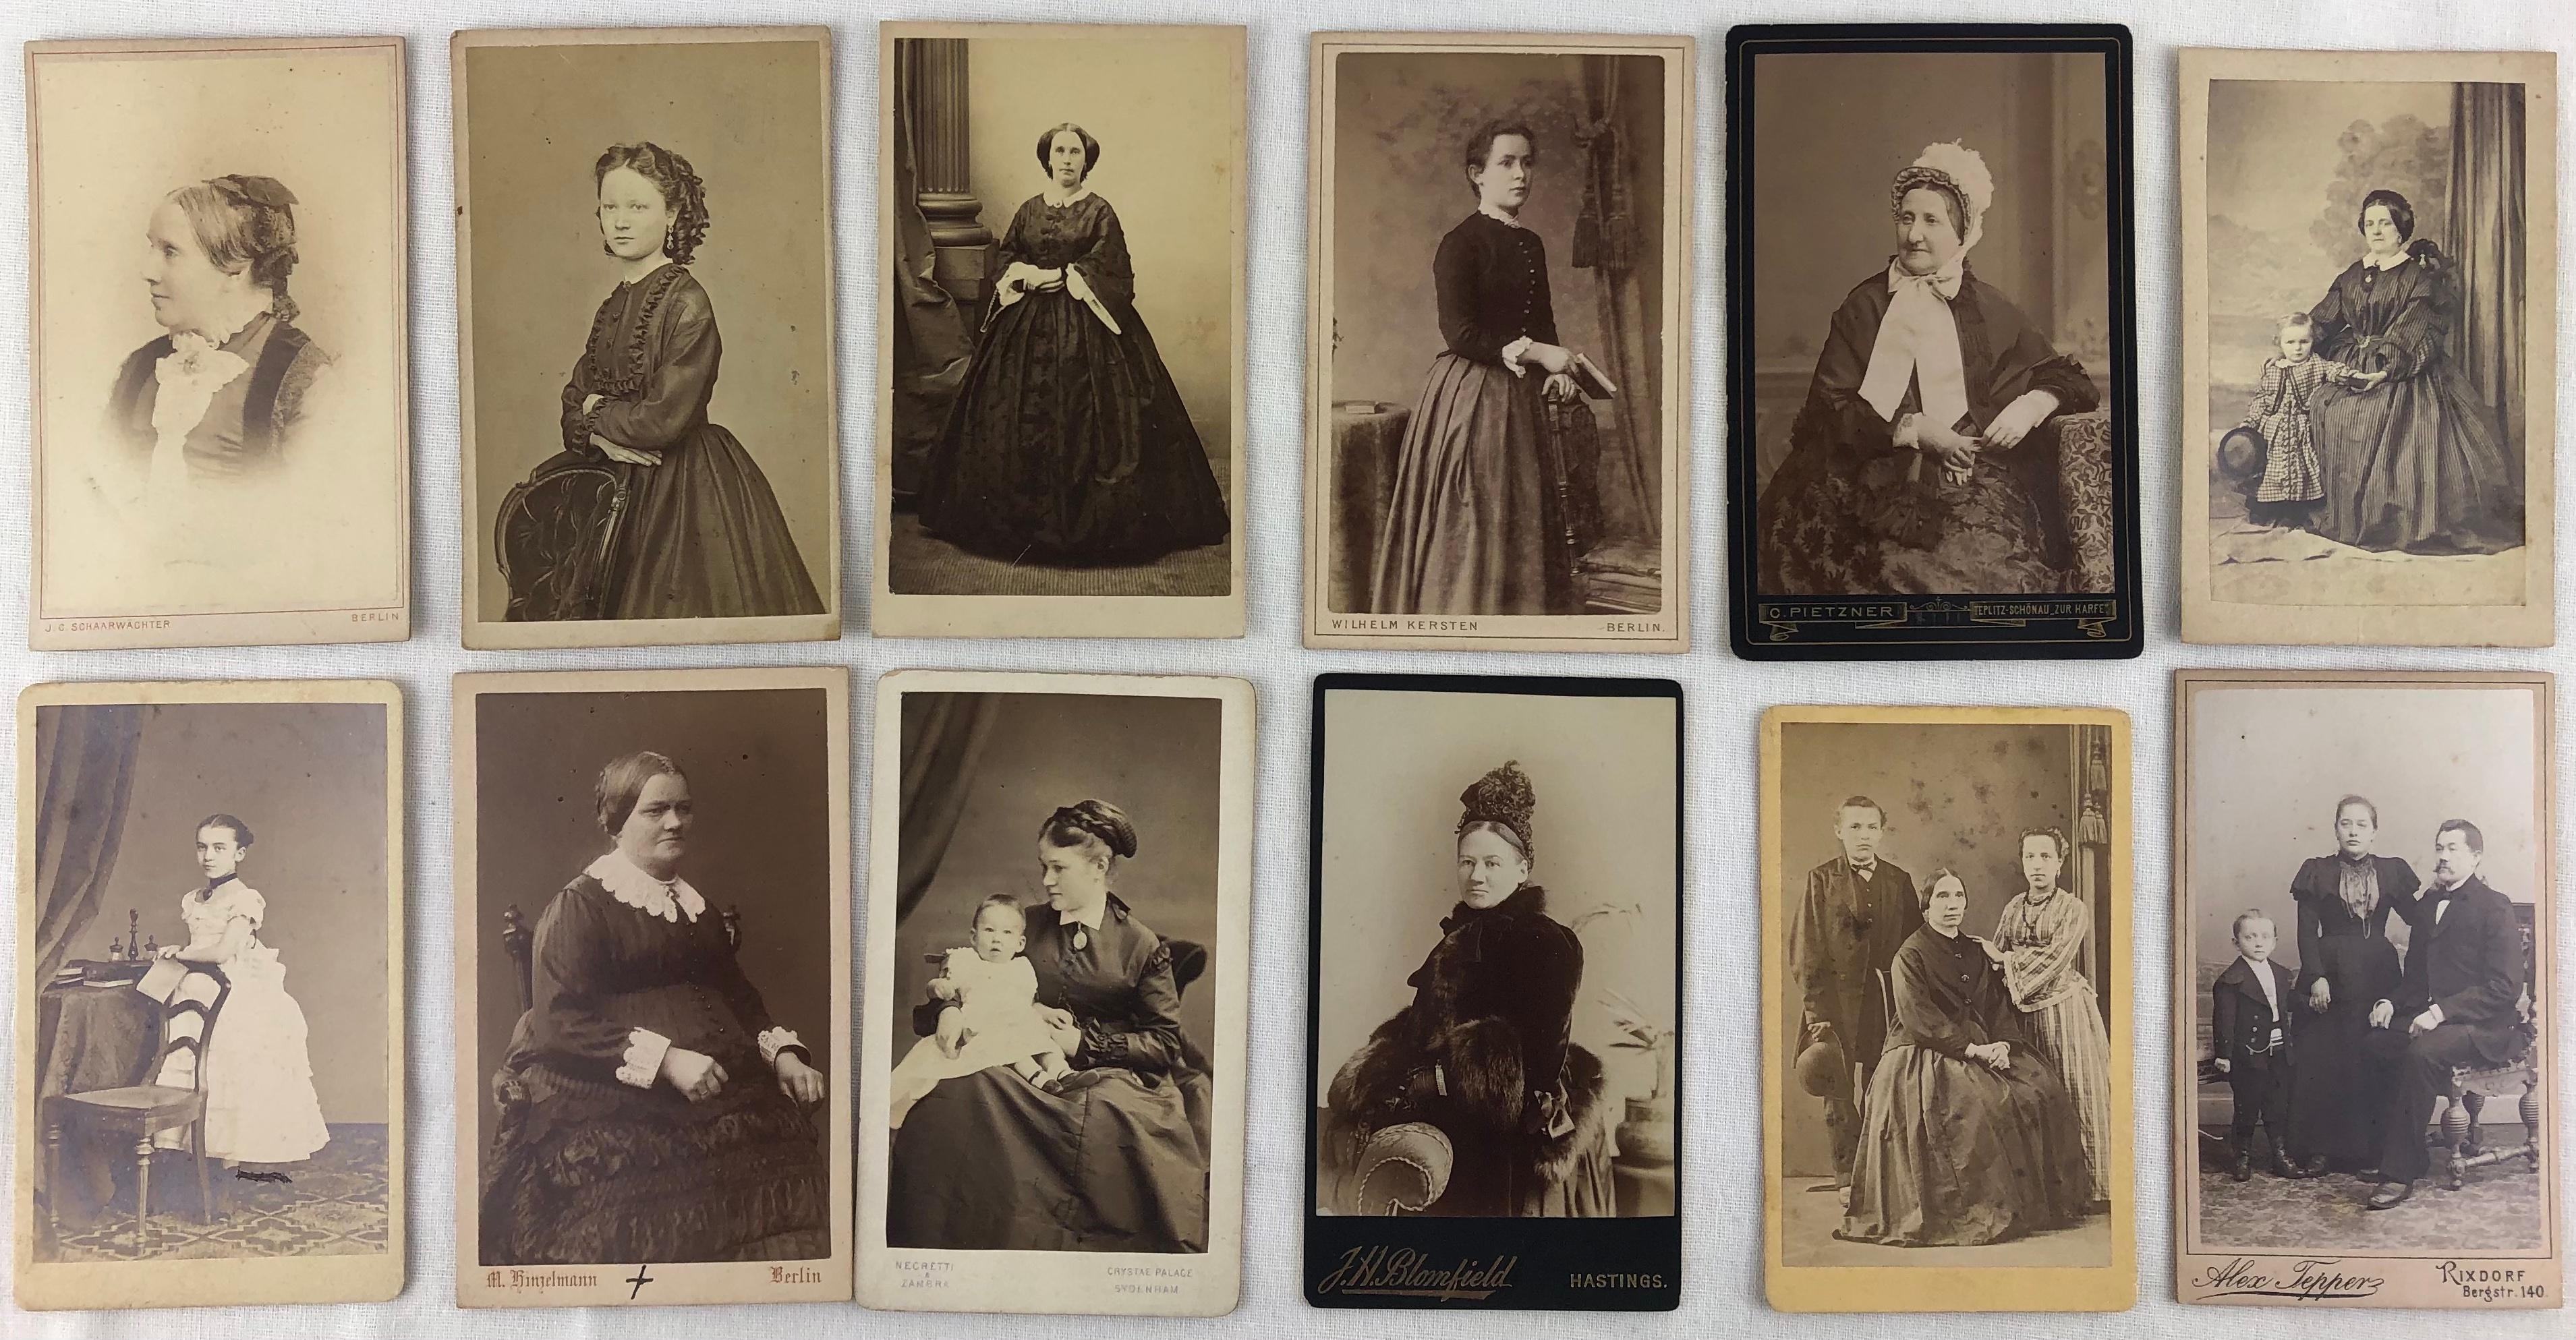 Collection of antique black and white ancestral photographs from Germany and perhaps Switzerland (Suisse/Allemagne) discovered inside an Alfonse Mucha Art Nouveau photo album. Some photos have markings on the back written in both the French and